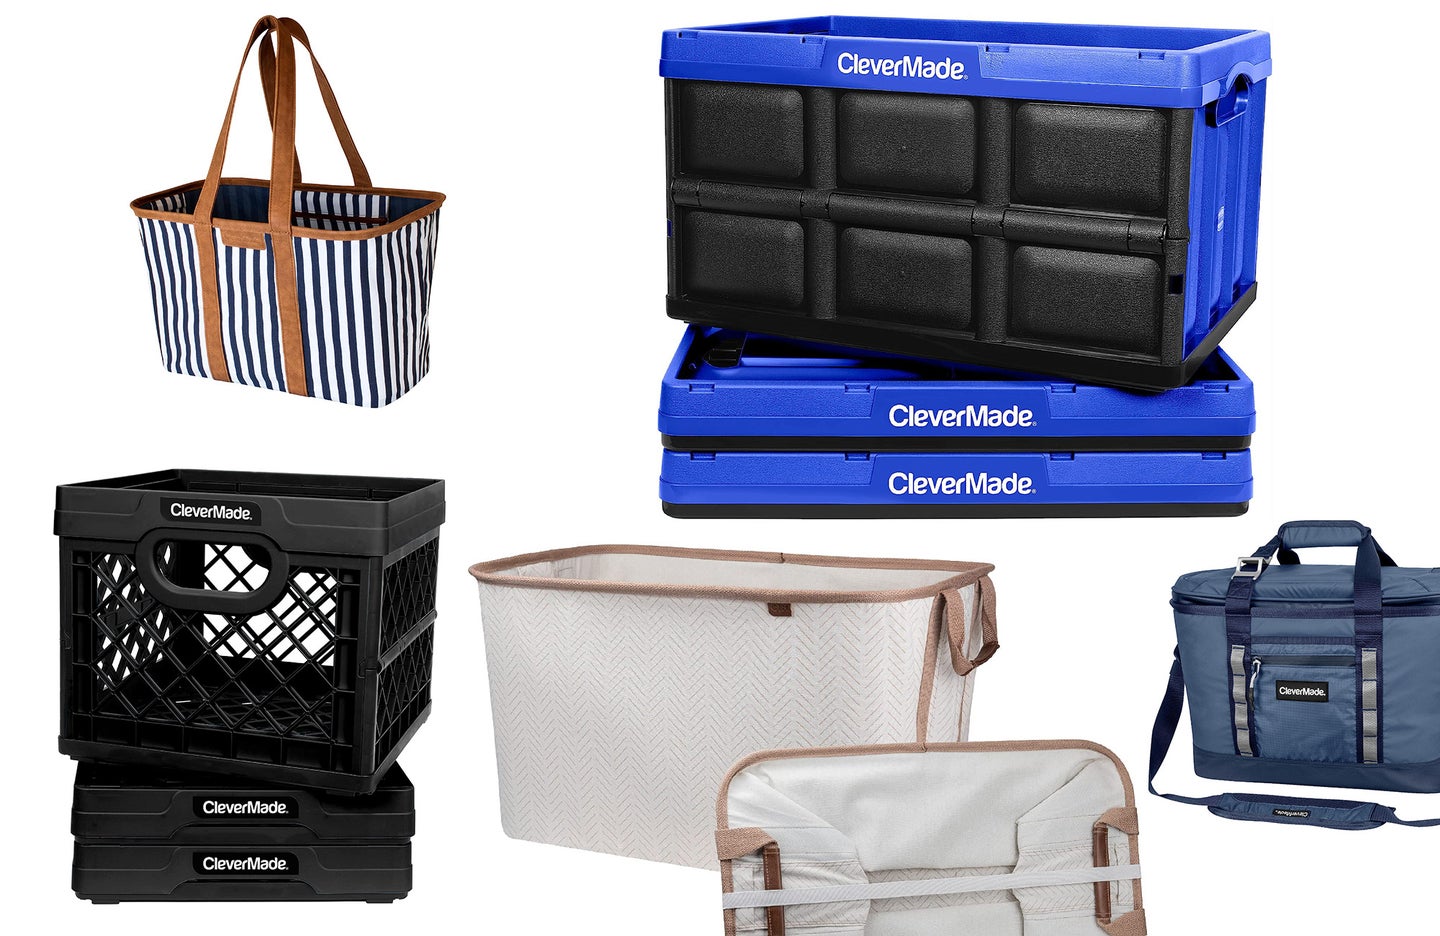 Save on storage solutions from CleverMade during this Prime Day.